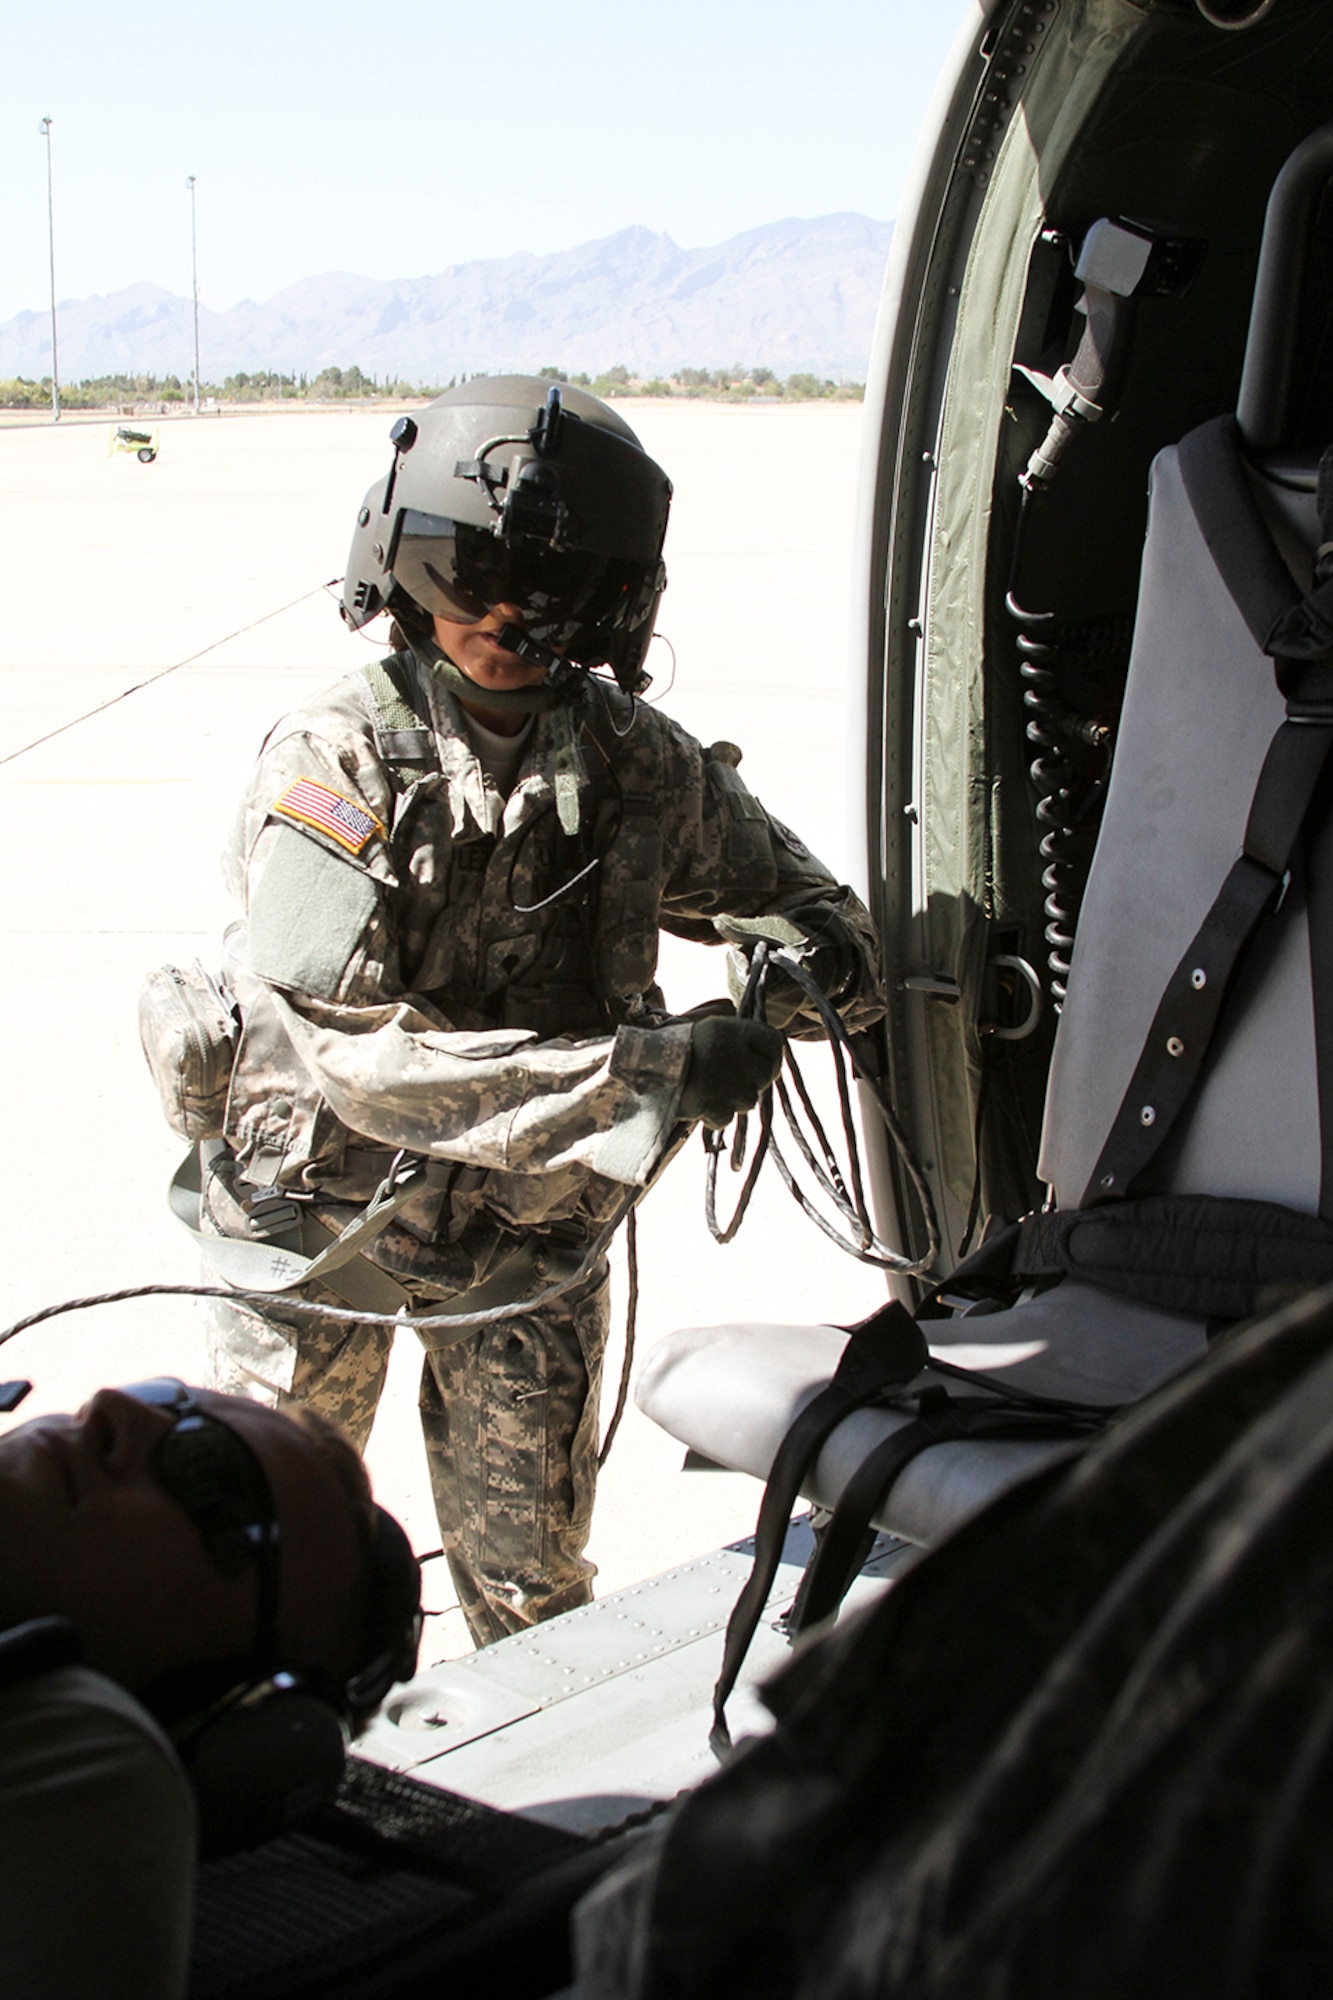 Spc. Nancy Gonzalez, a loadmaster assigned to the 7th Battalion, 158th Aviation Regiment of the Army National Guard, prepares the Blackhawk HH-60M Medevac helicopter for takeoff during a simulated casualty evacuation scenario as part of Exercise ANGEL THUNDER at Davis-Monthan AFB, Ariz., May 7, 2014.  ANGEL THUNDER is a multilateral annual exercise that to supports DoD’s training requirements for Personnel Recovery responsibilities through high–fidelity exercises.  Exercise ANGEL THUNDER focuses on scenarios that rescue forces are likely to face in current and future contingencies—increasing their combat readiness across a range of military options. (U.S. Air Force photo by Tech. Sgt. Heather R. Redman/Released)